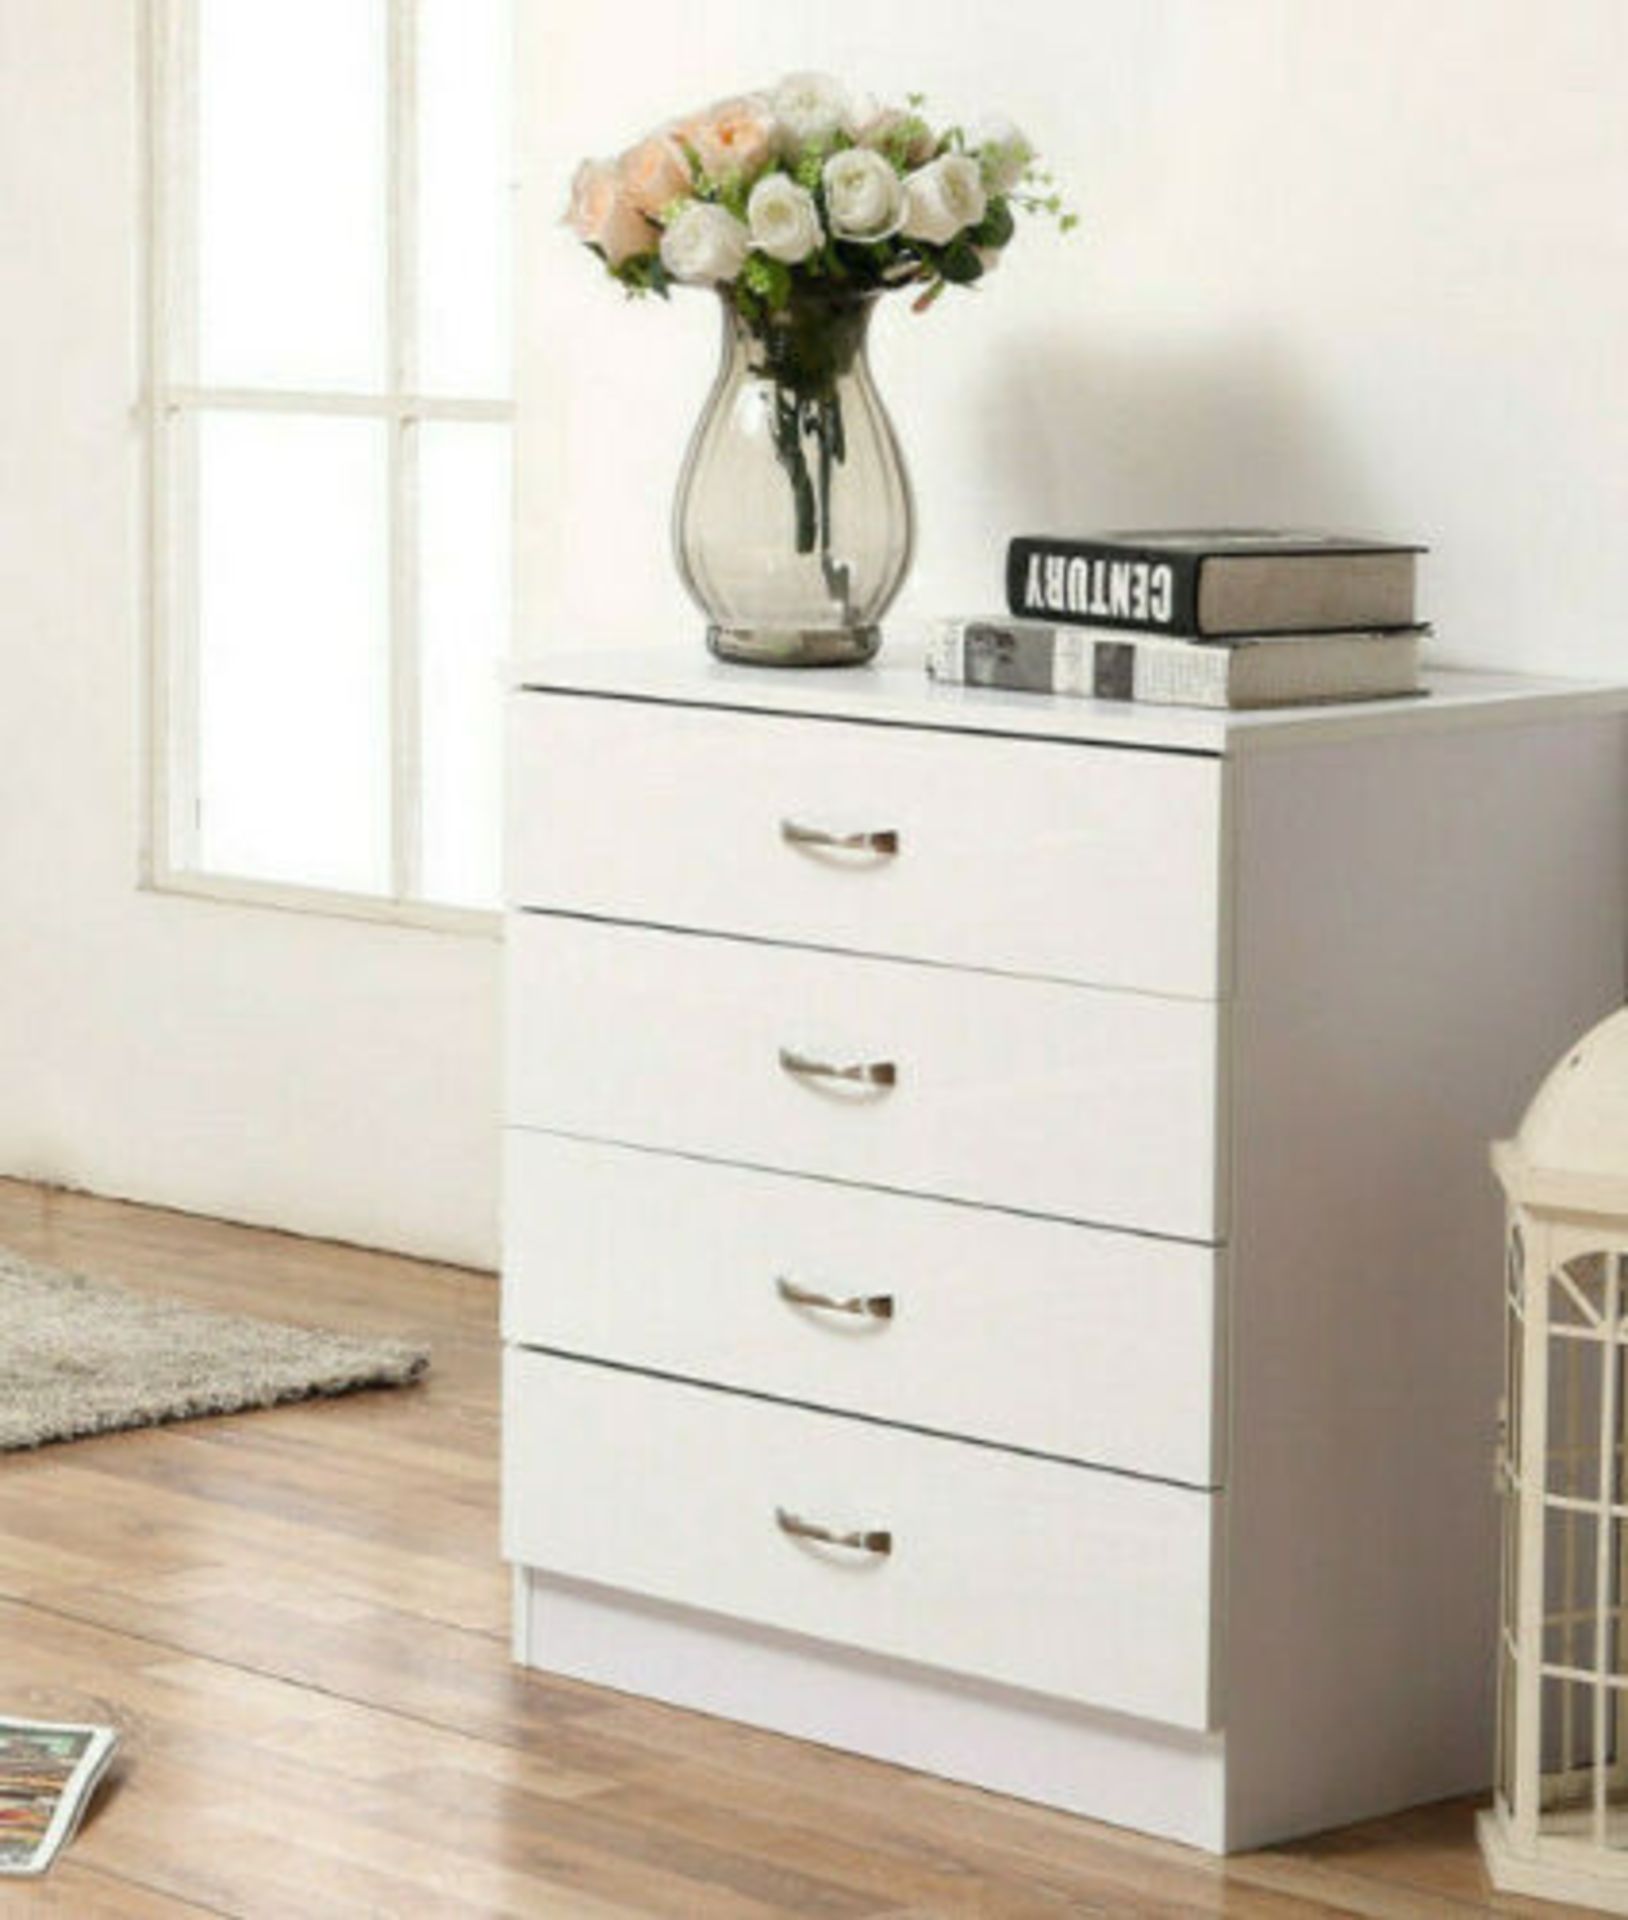 WHITE 4 DRAWER CHEST WITH HIGH GLOSS FRONTS - Image 3 of 4